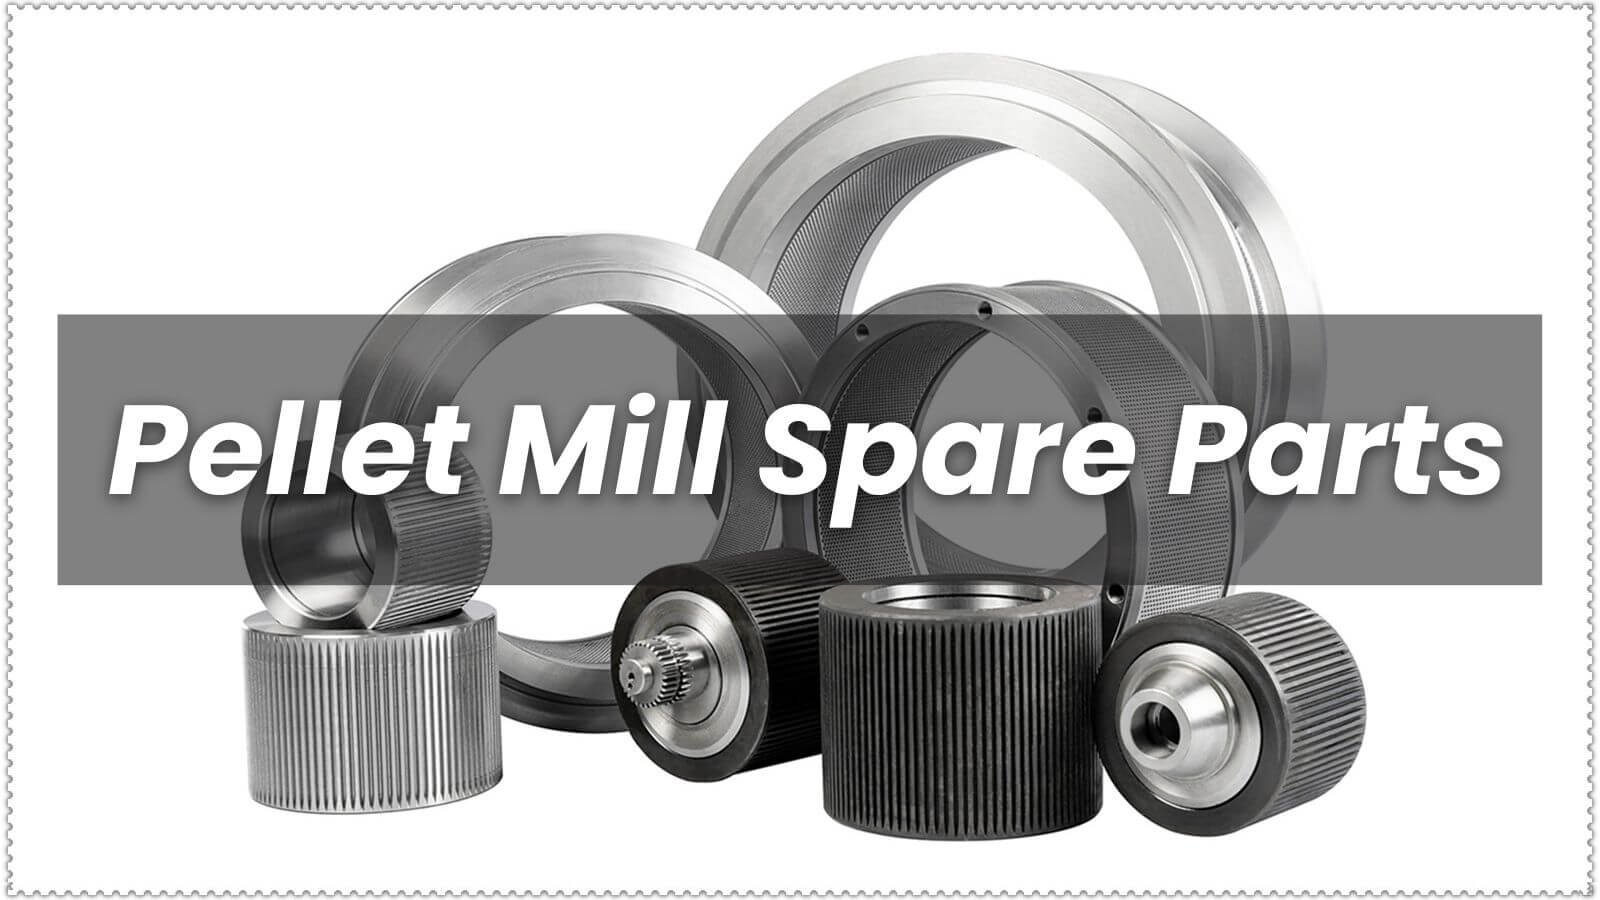 China Pellet Mill Spare Parts